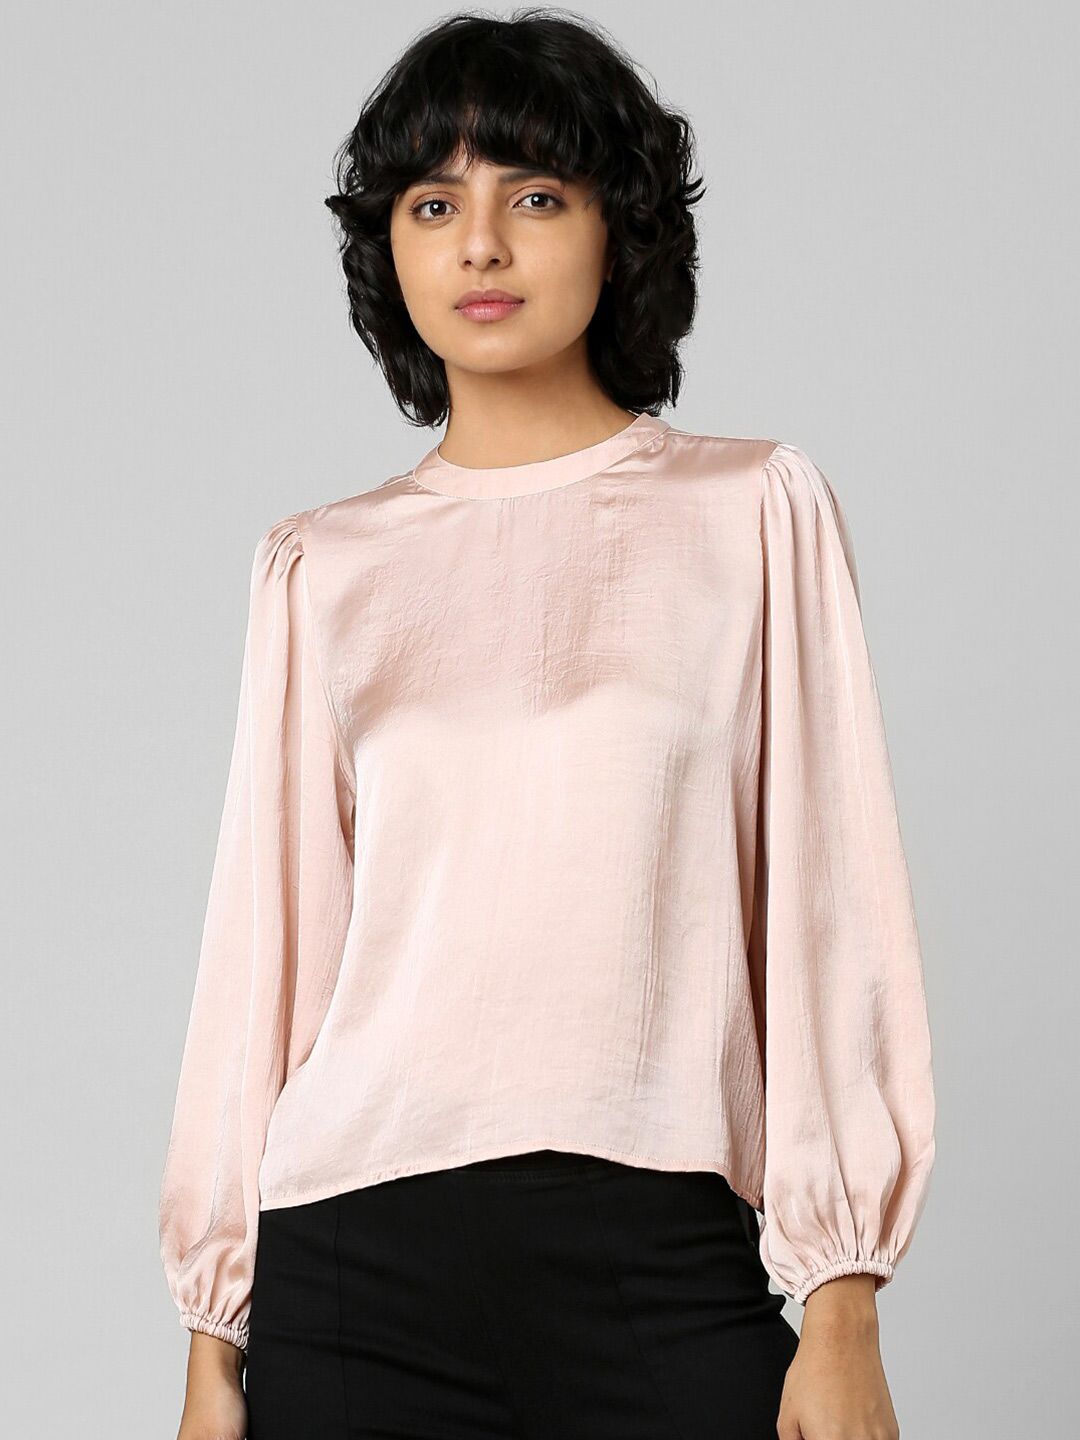 ONLY Woman Satin Long Sleeve Top Price in India